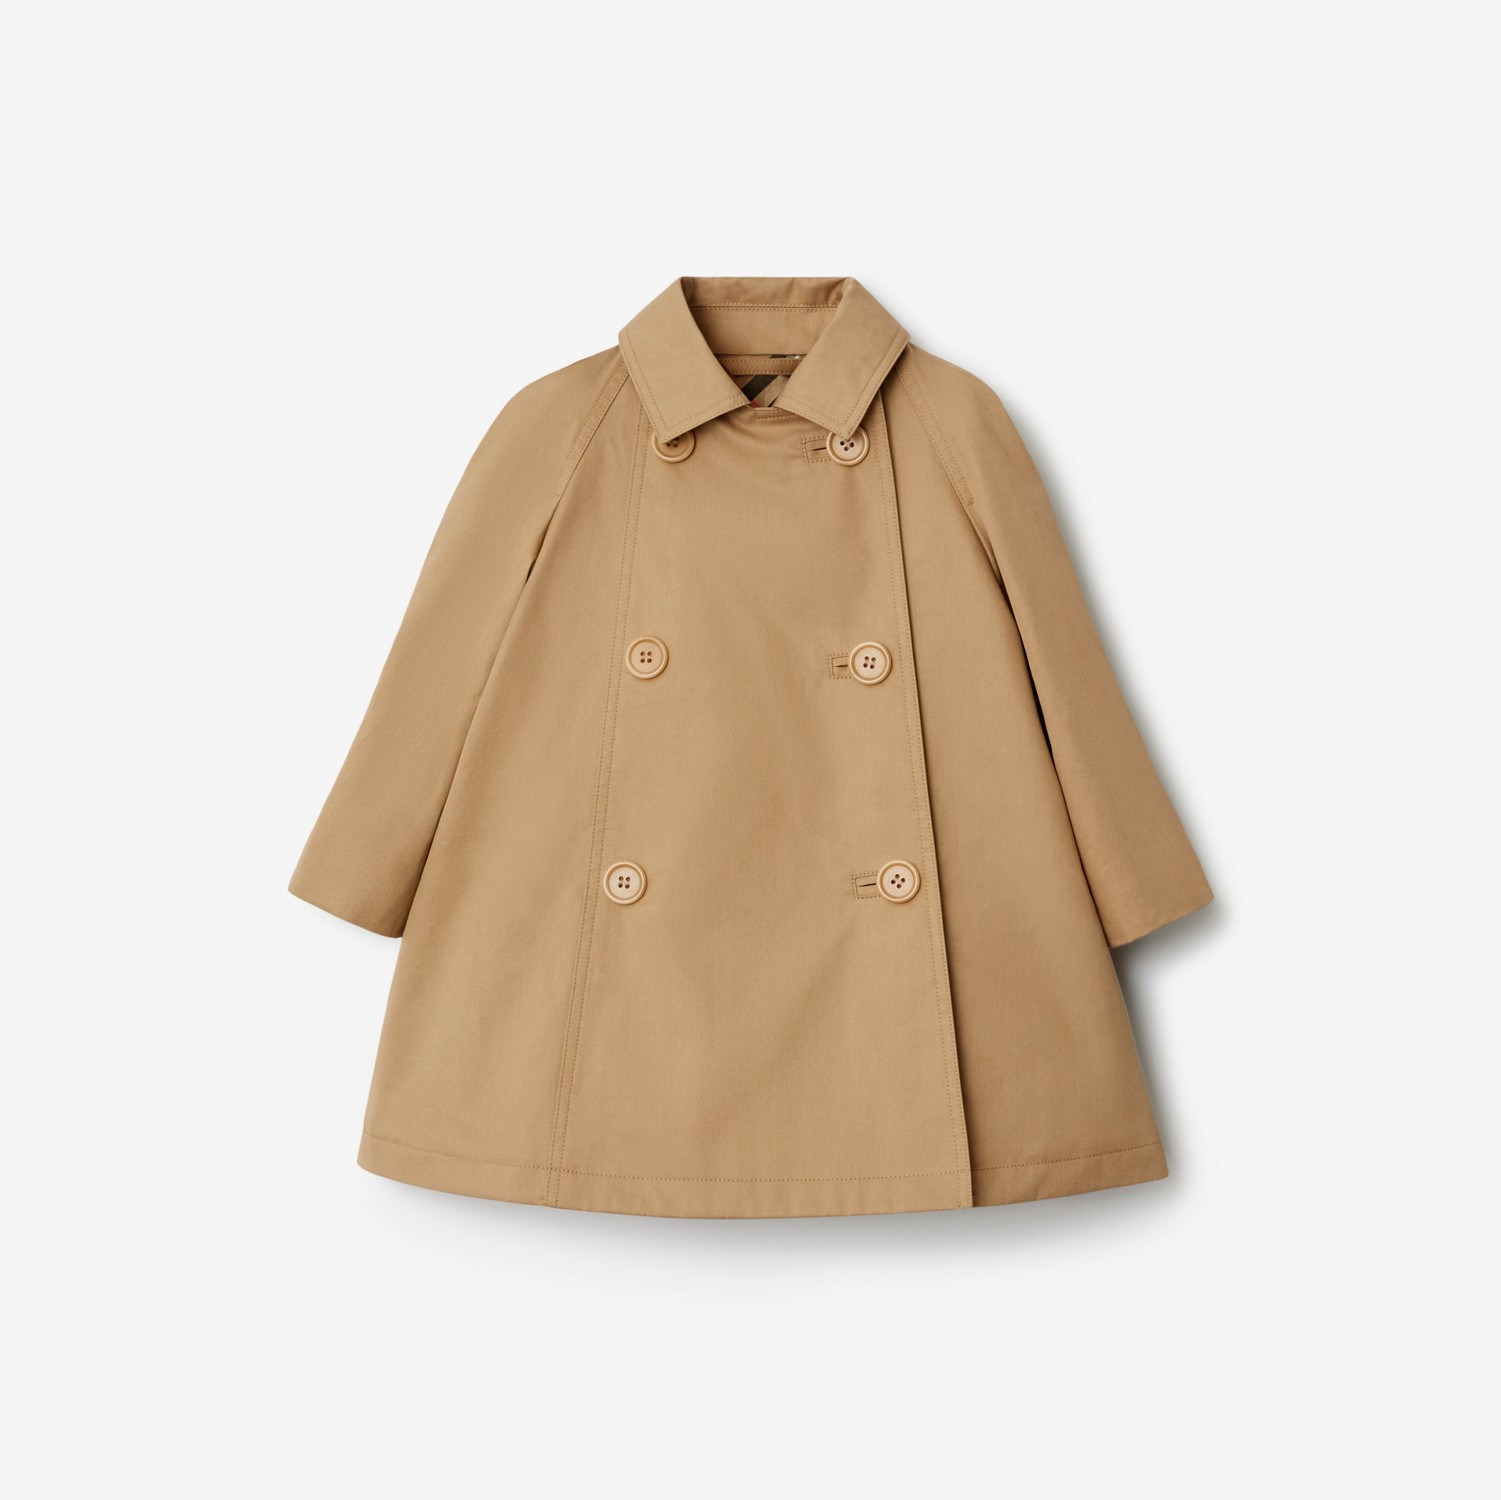 Trench coat in cotone